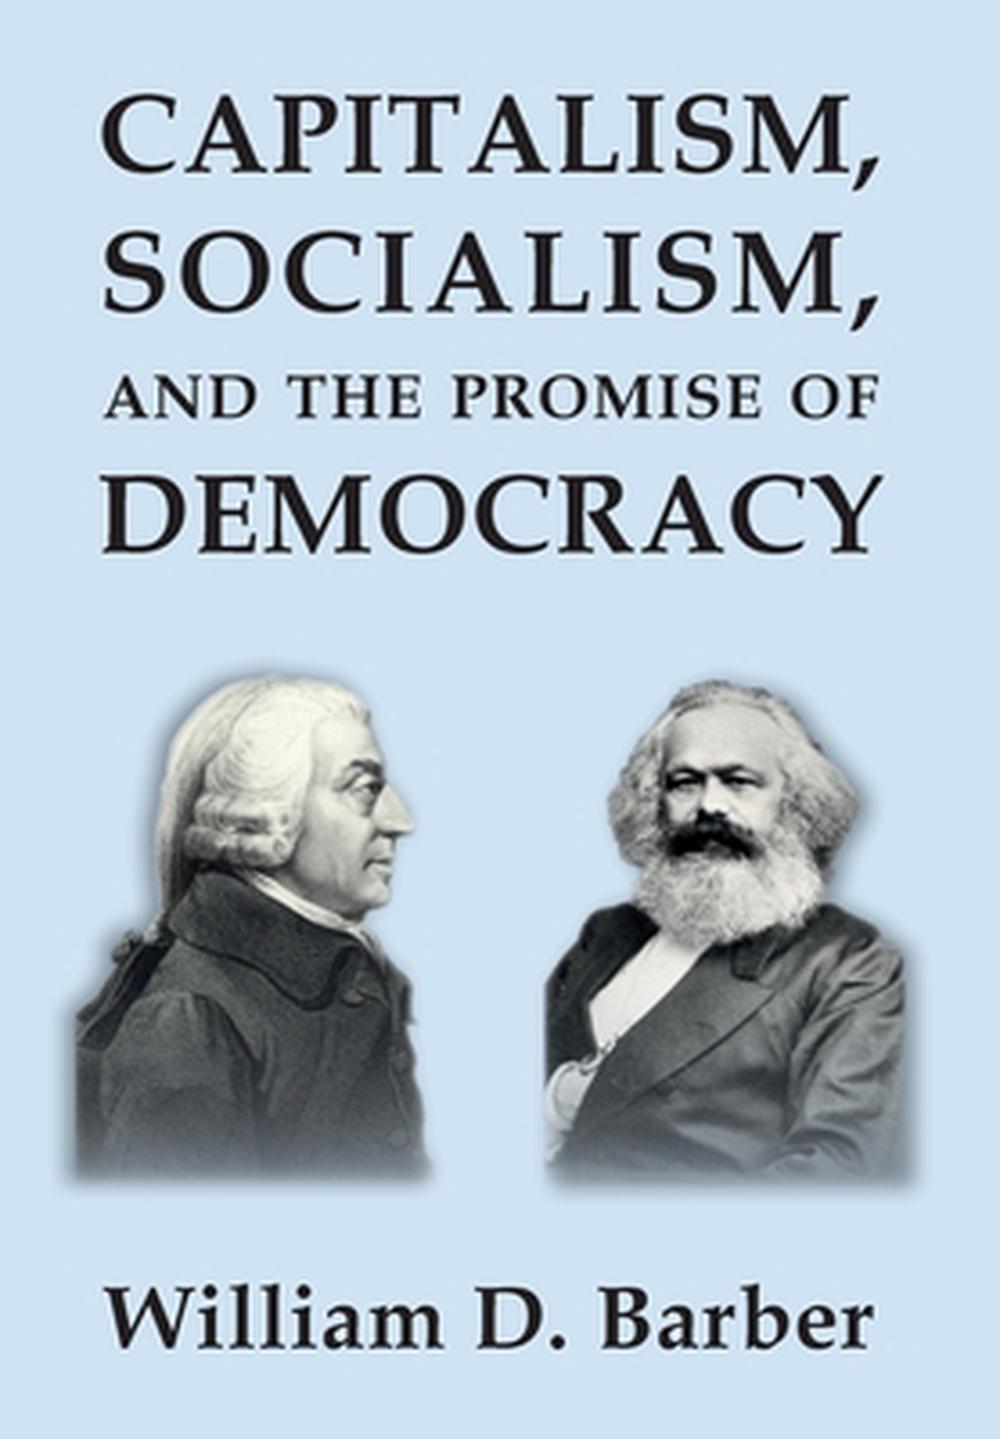 schumpeter joseph capitalism socialism and democracy